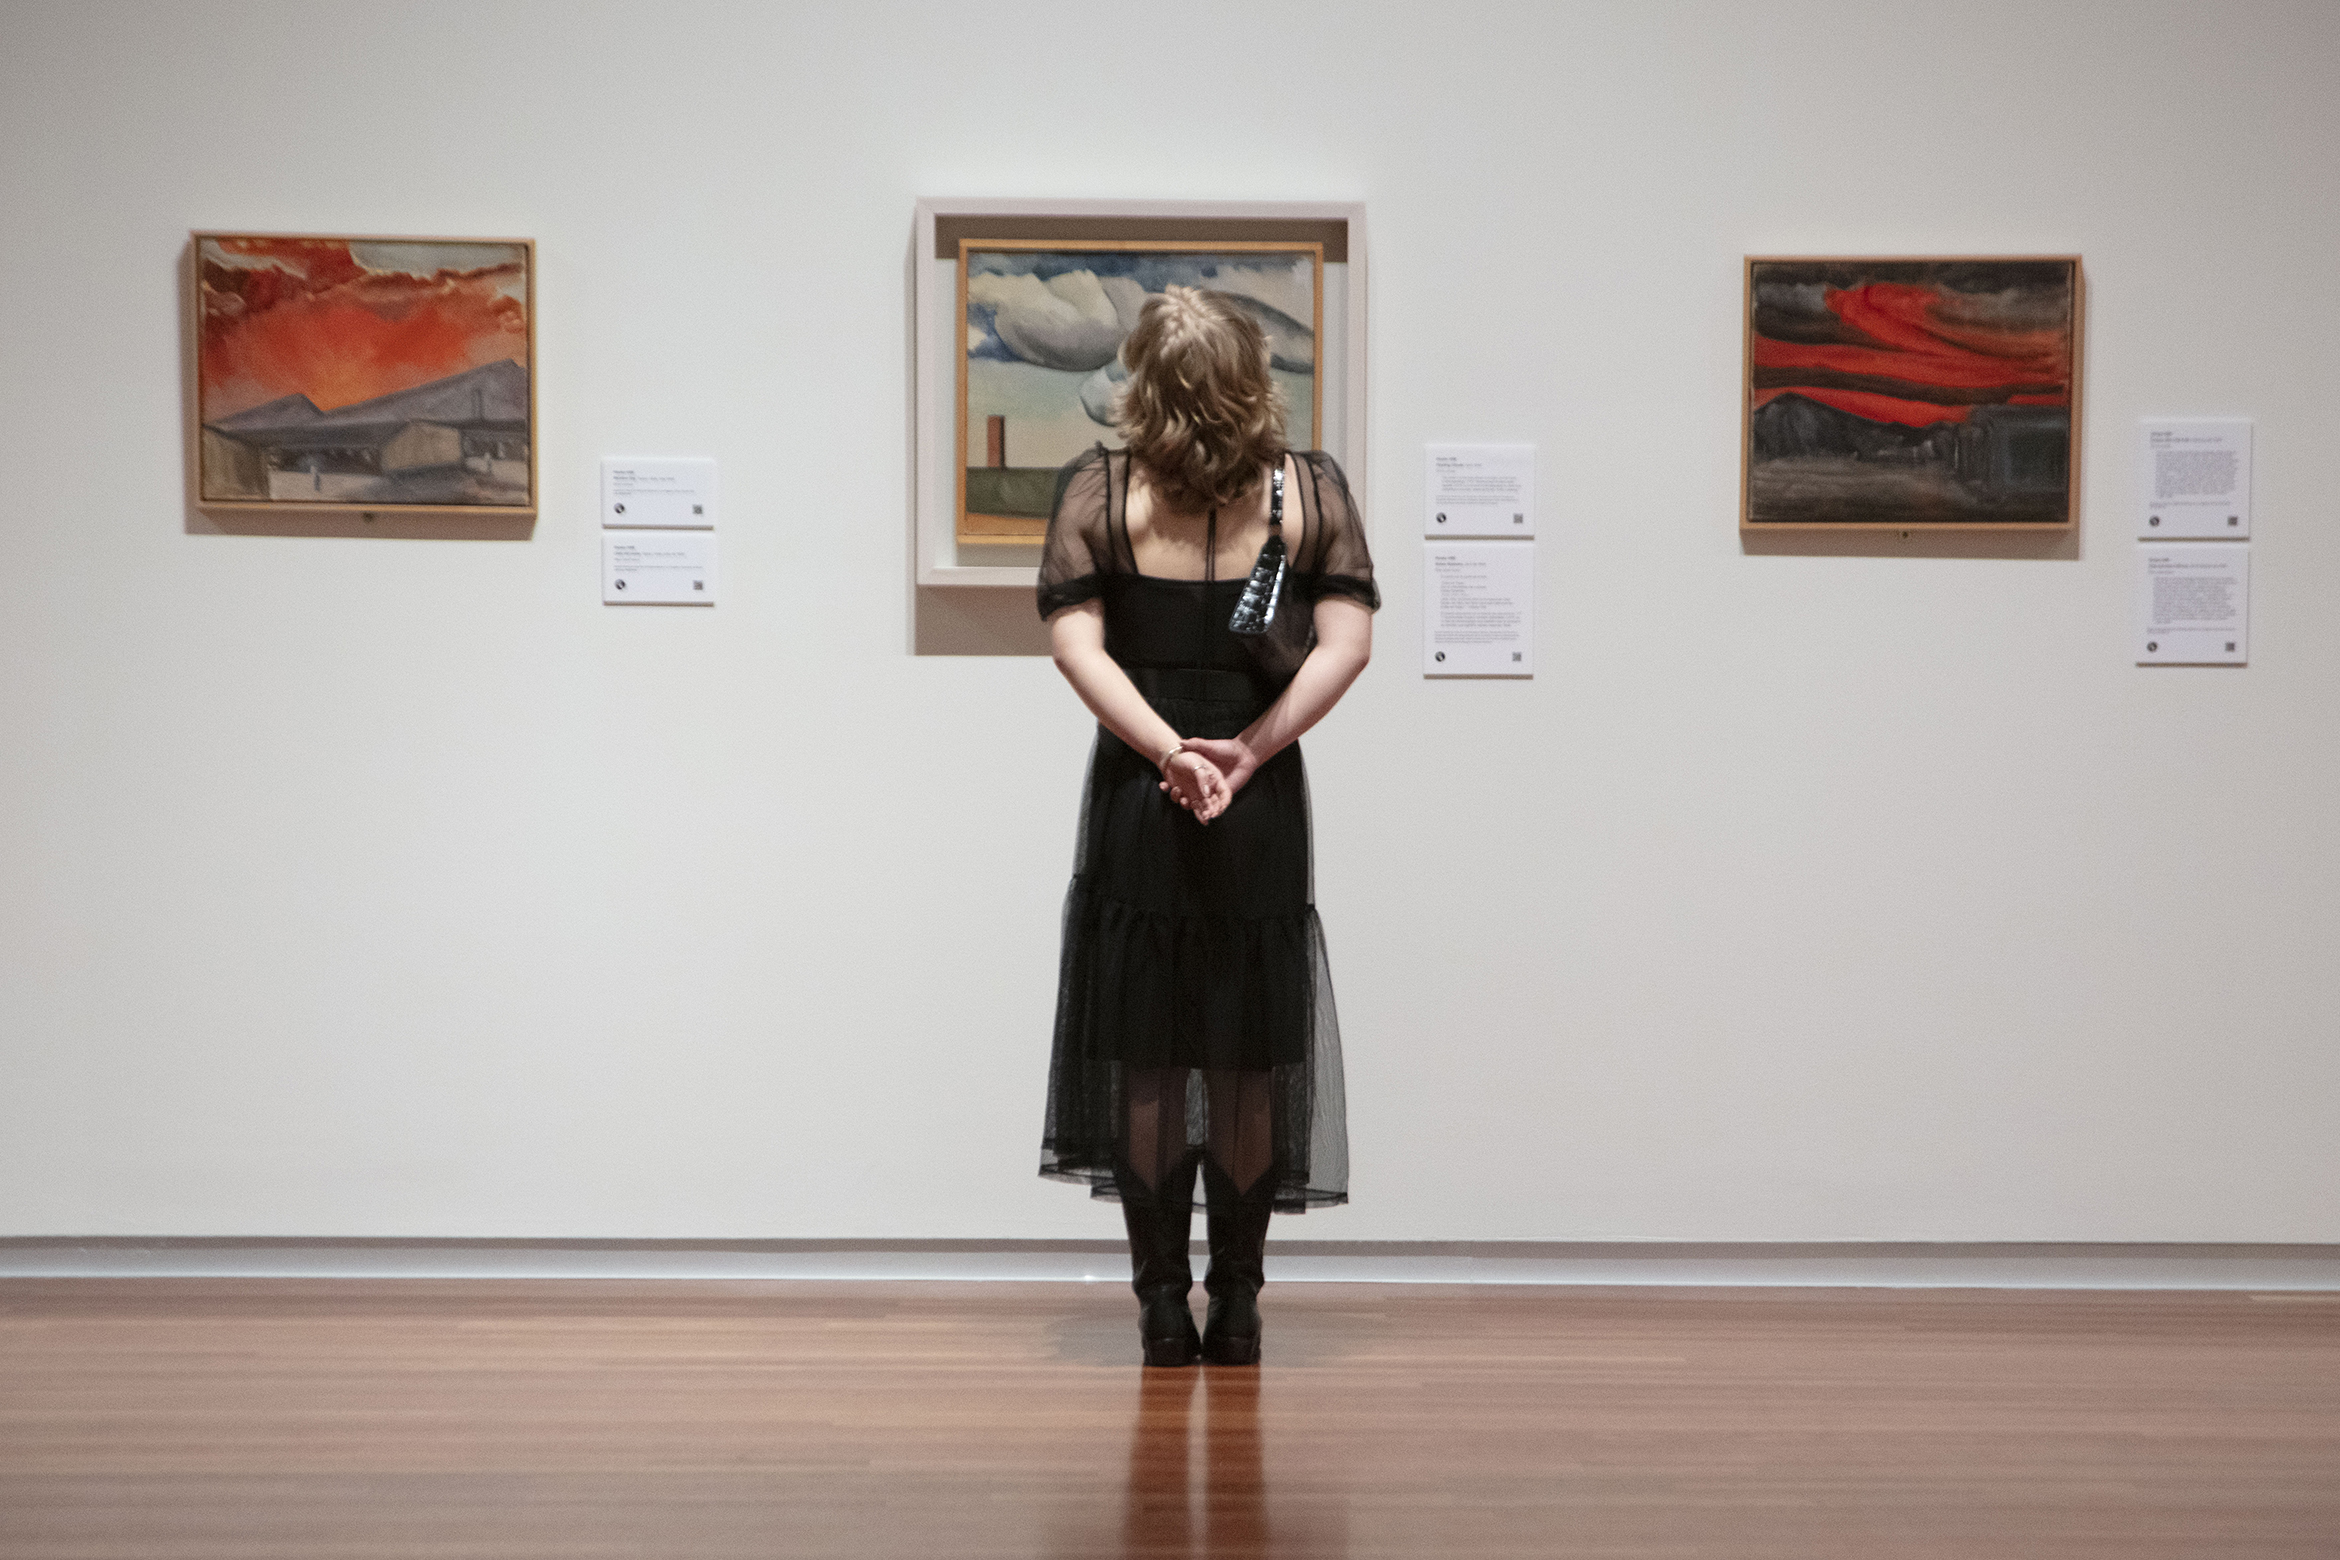 A photo of a white woman in a black dress with light blonde hair standing with her back to the camera, facing three framed paintings hanging on a wall.